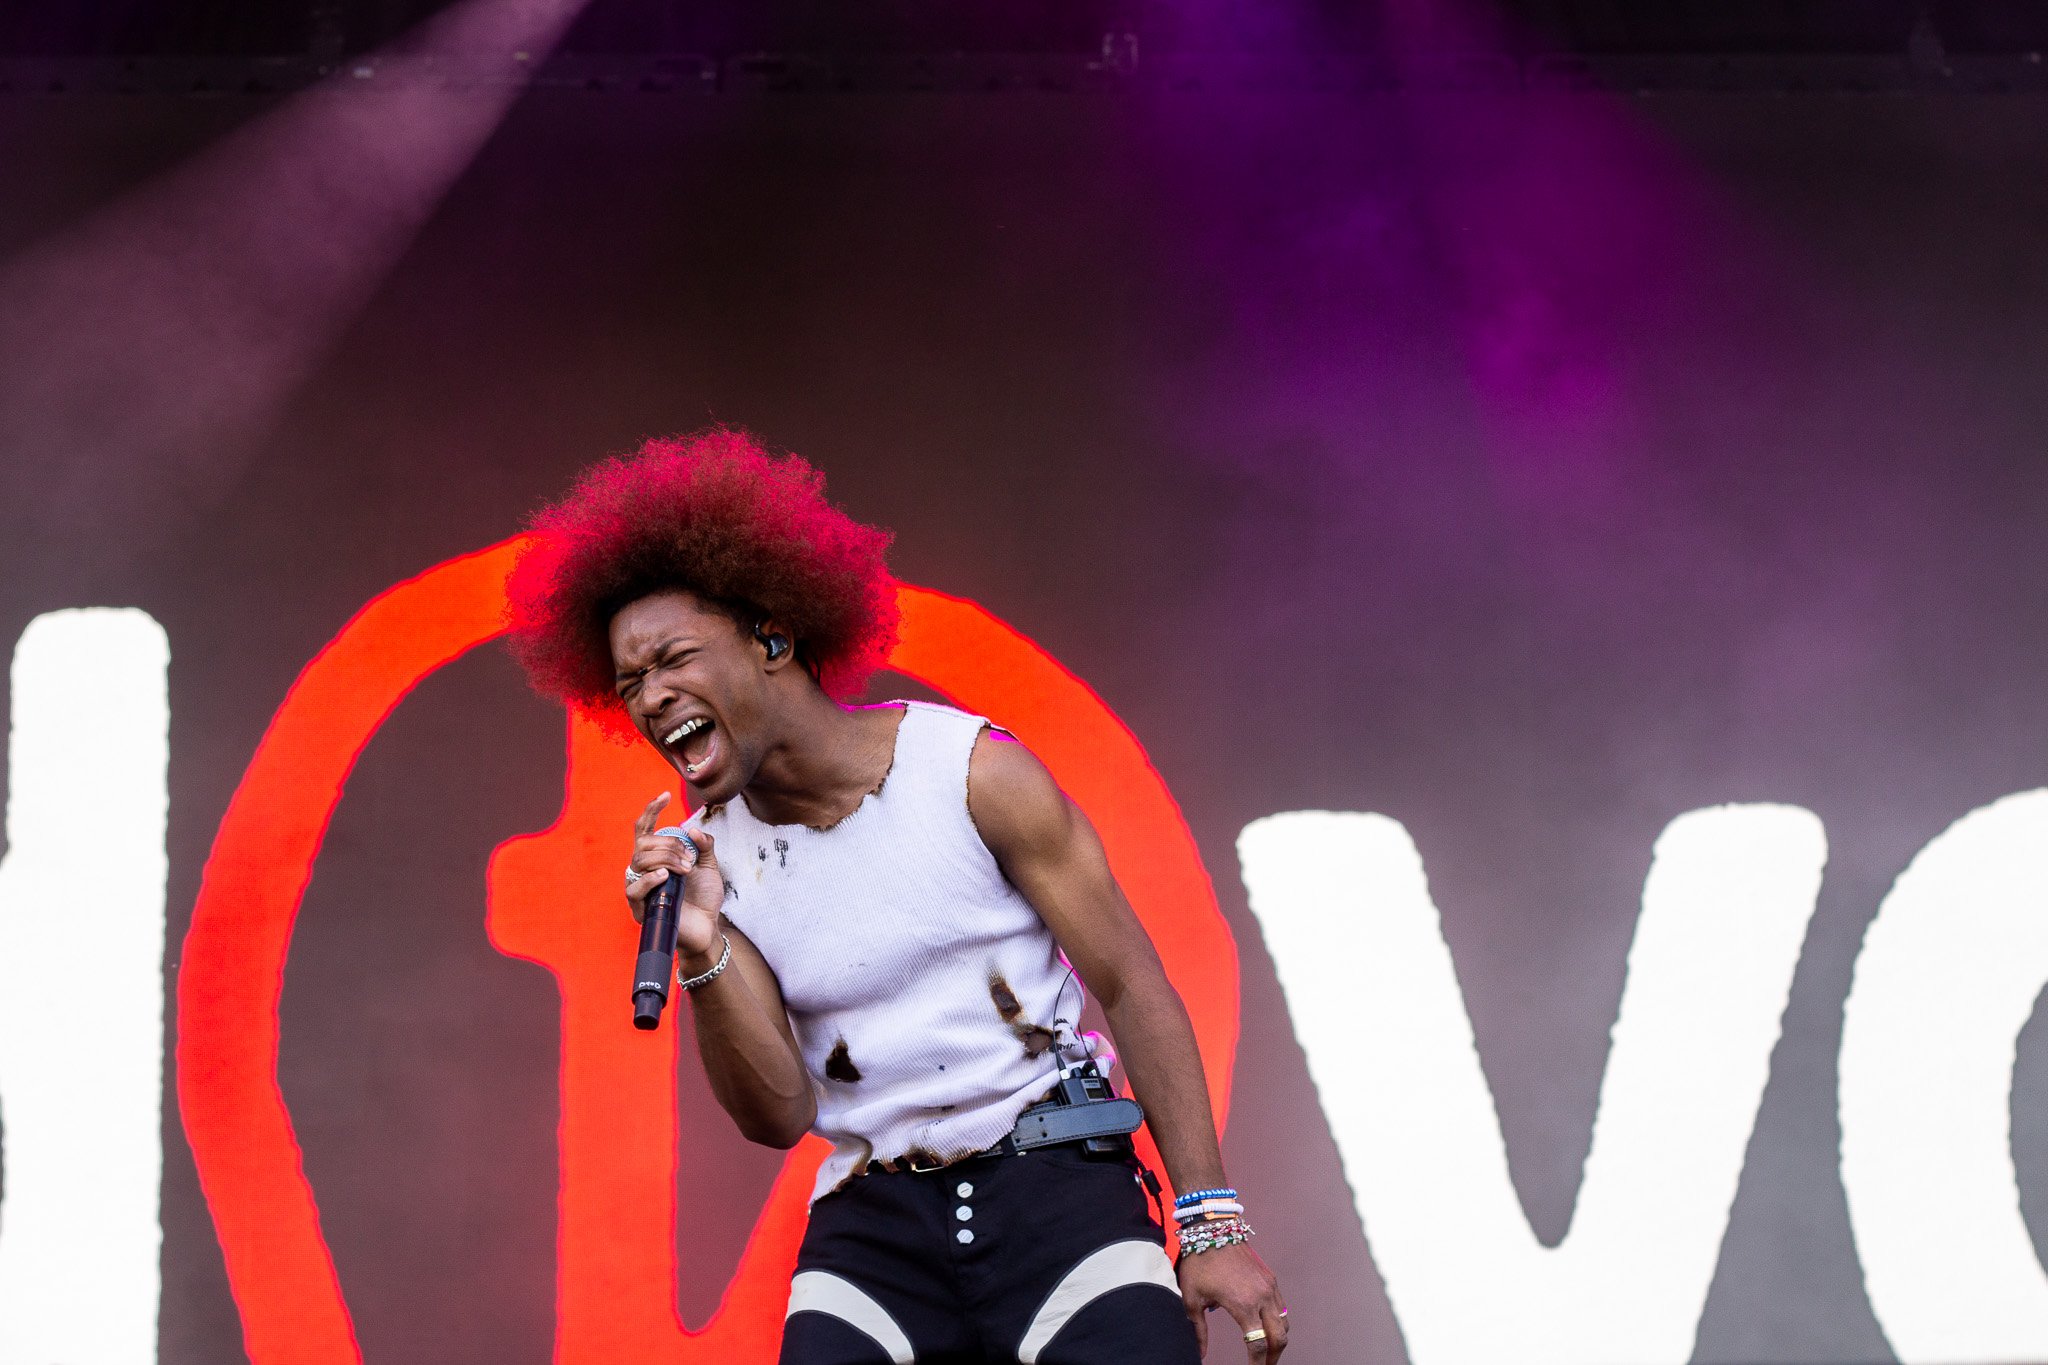   d4vd lights up the IHG stage at ACL with a passionate performance of his alternative beats. 